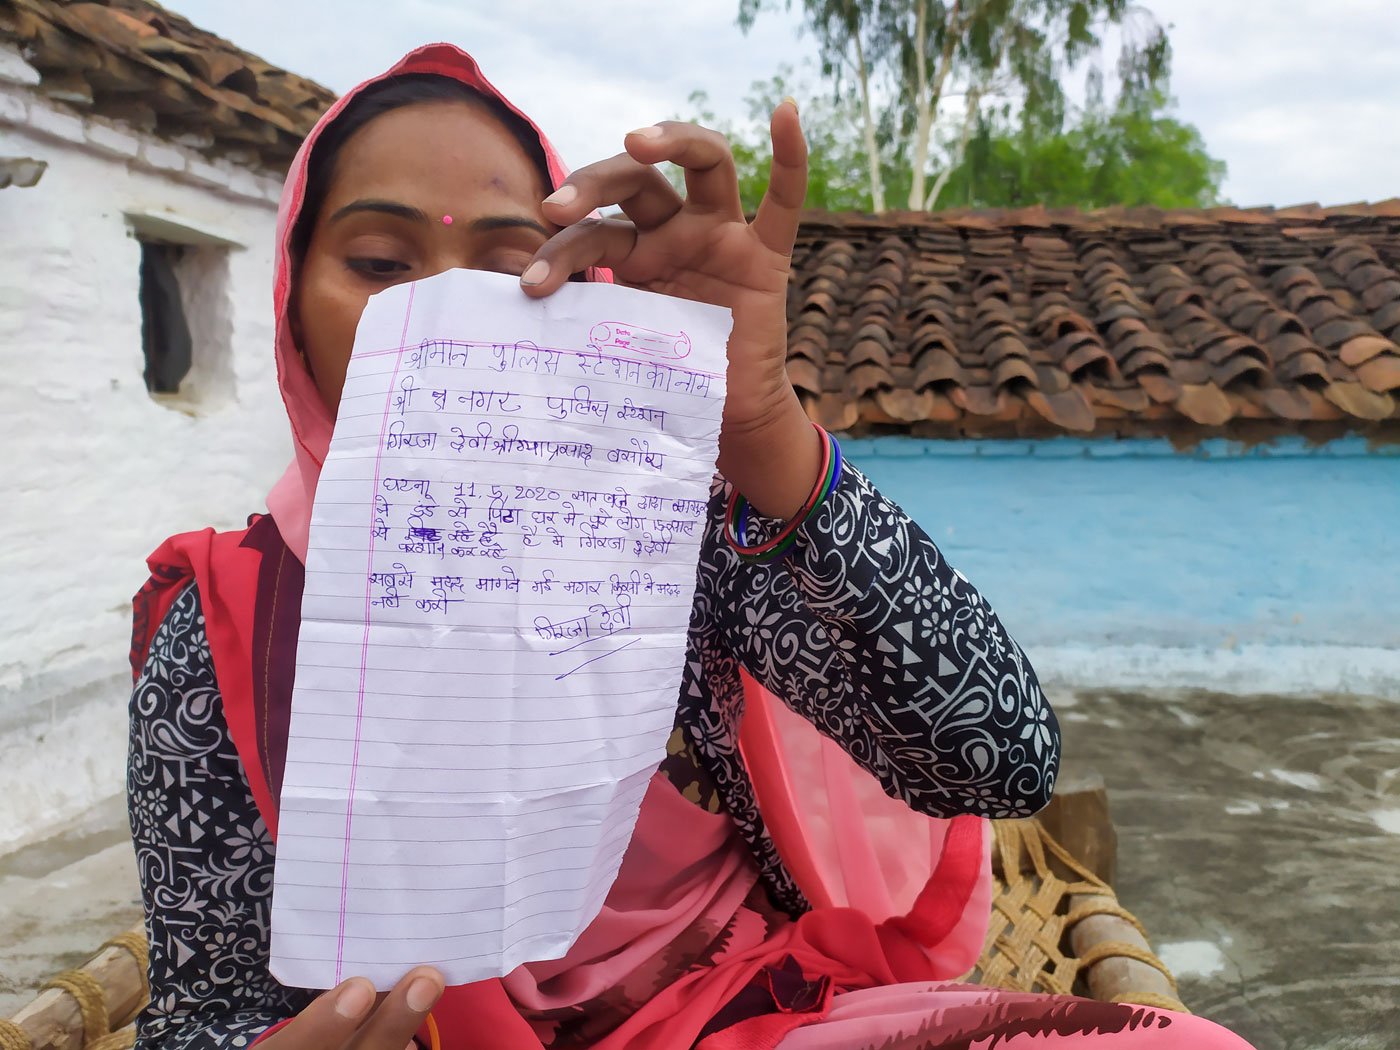 Girija with the letter of complaint for the police that she had her 14-year-old daughter Anuradha write on her behalf 

